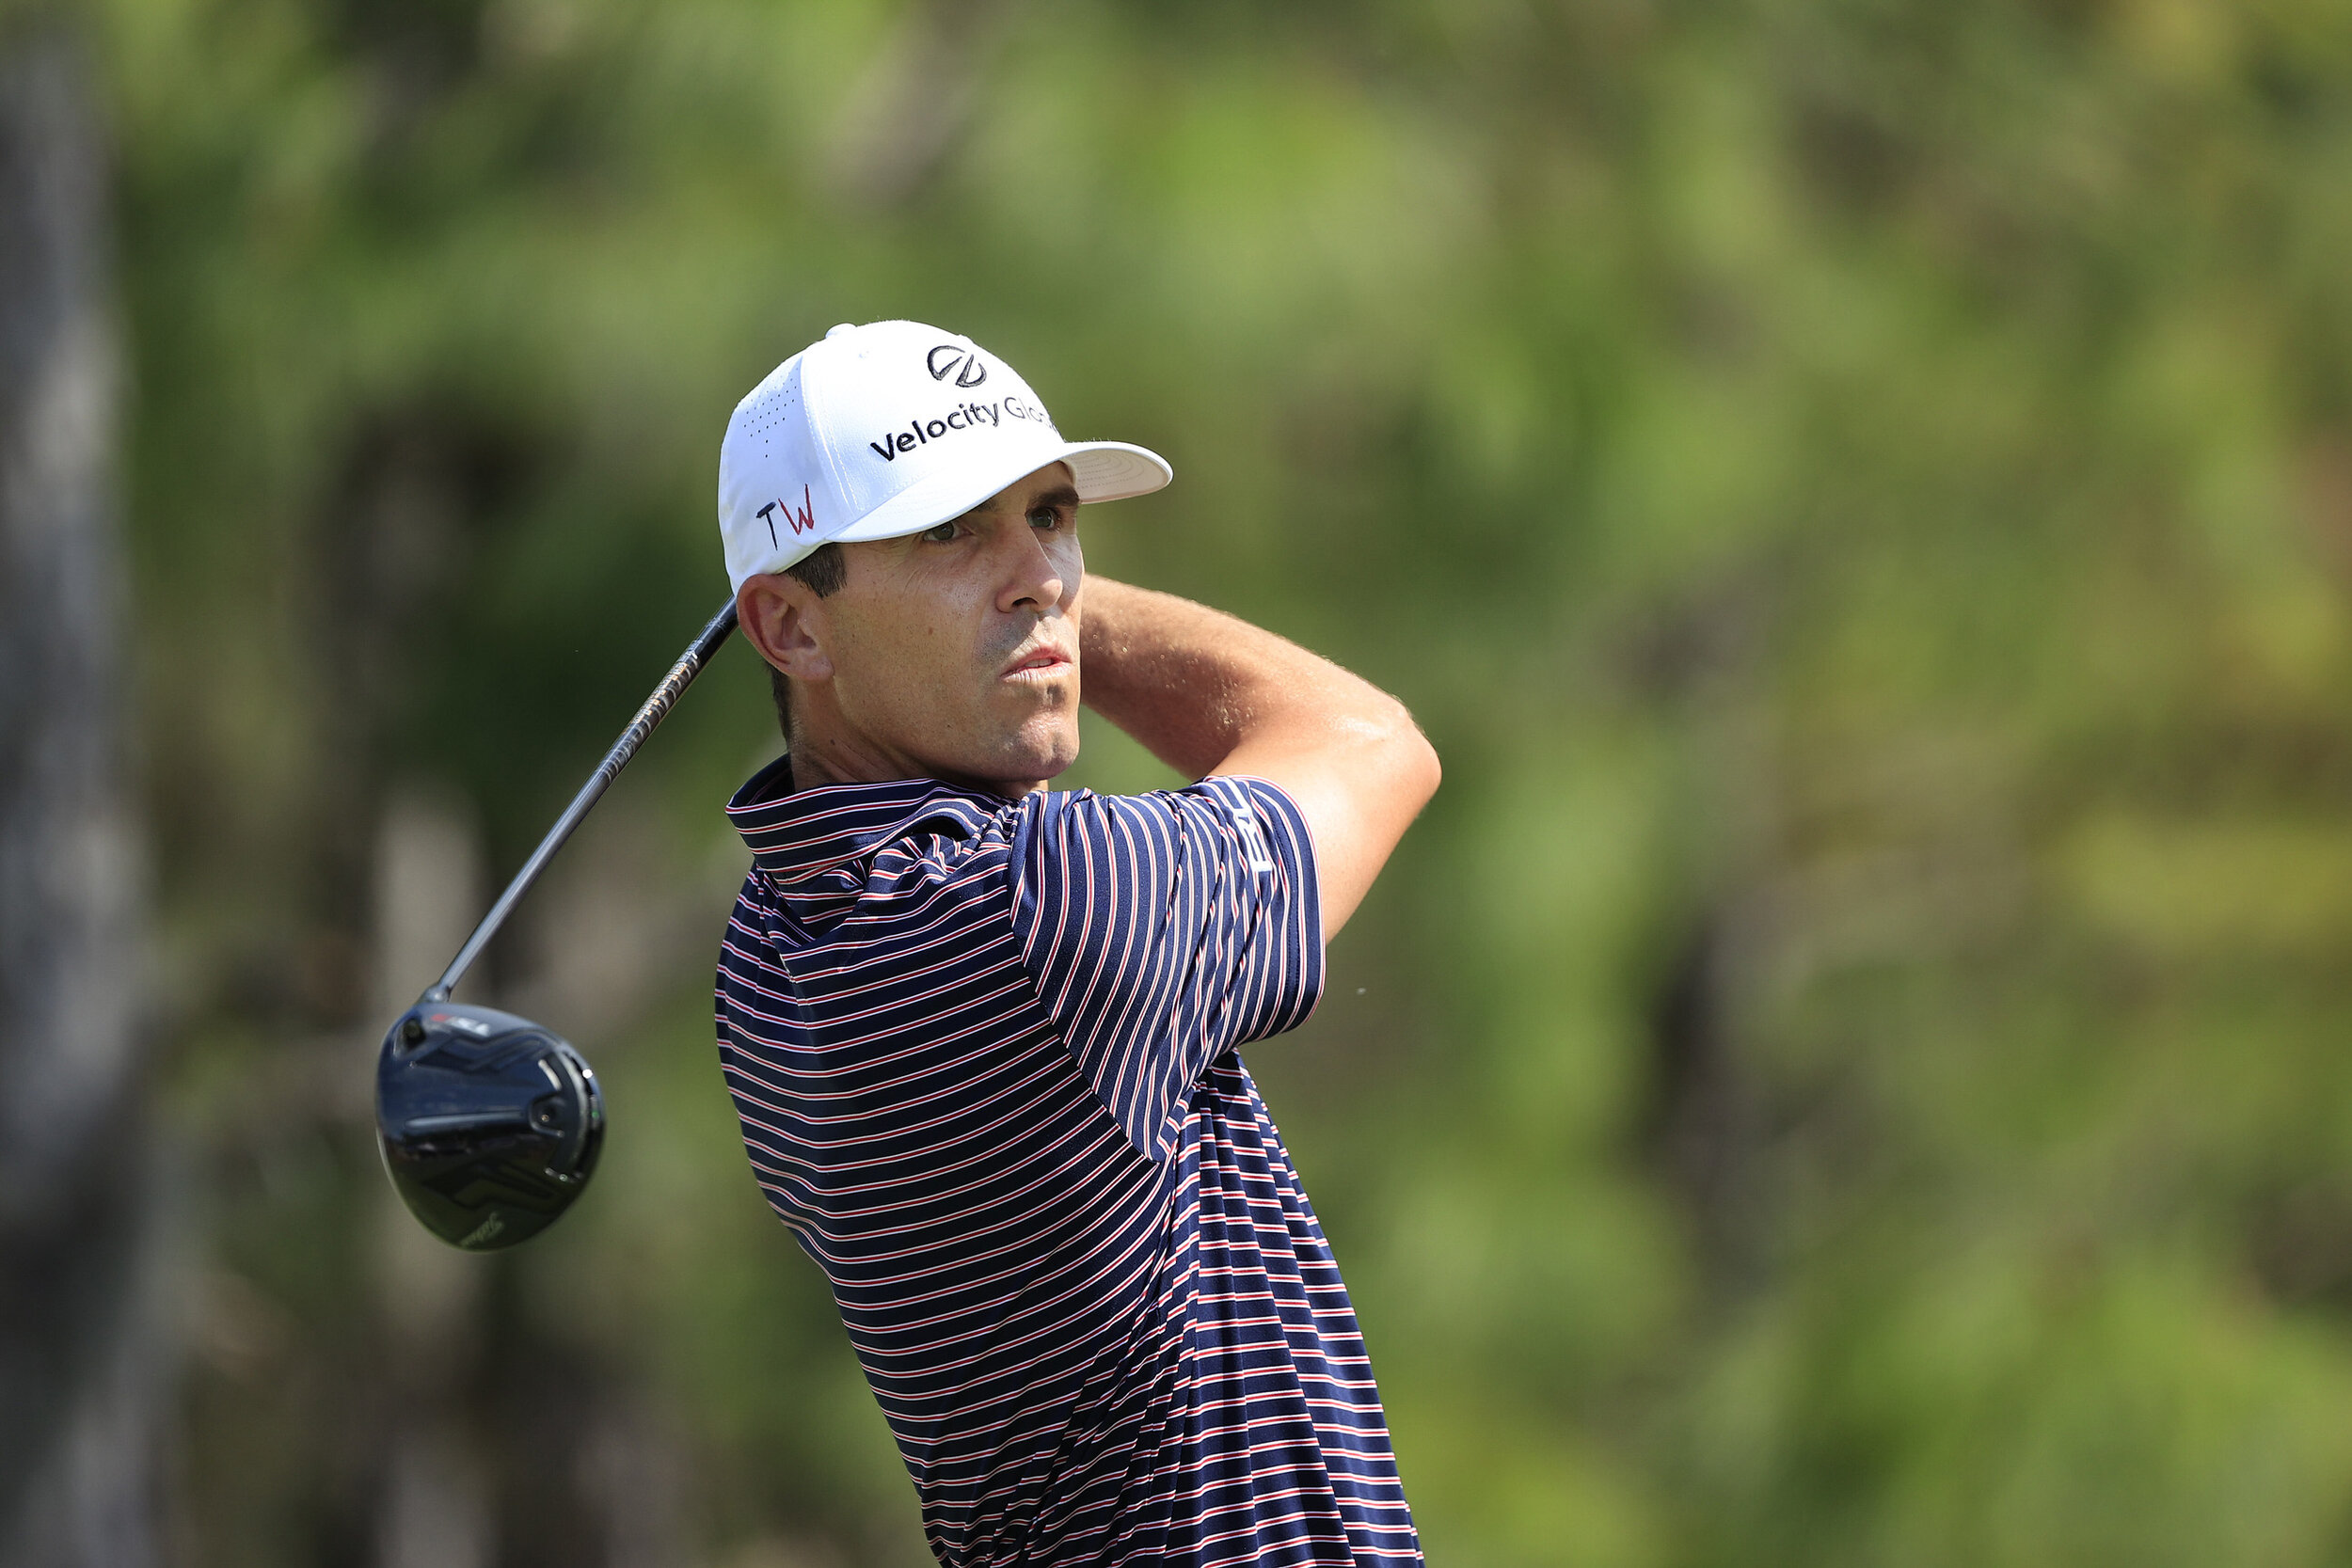  BRADENTON, FLORIDA - FEBRUARY 28: Billy Horschel of the United States plays his shot from the third tee during the final round of World Golf Championships-Workday Championship at The Concession on February 28, 2021 in Bradenton, Florida. (Photo by S